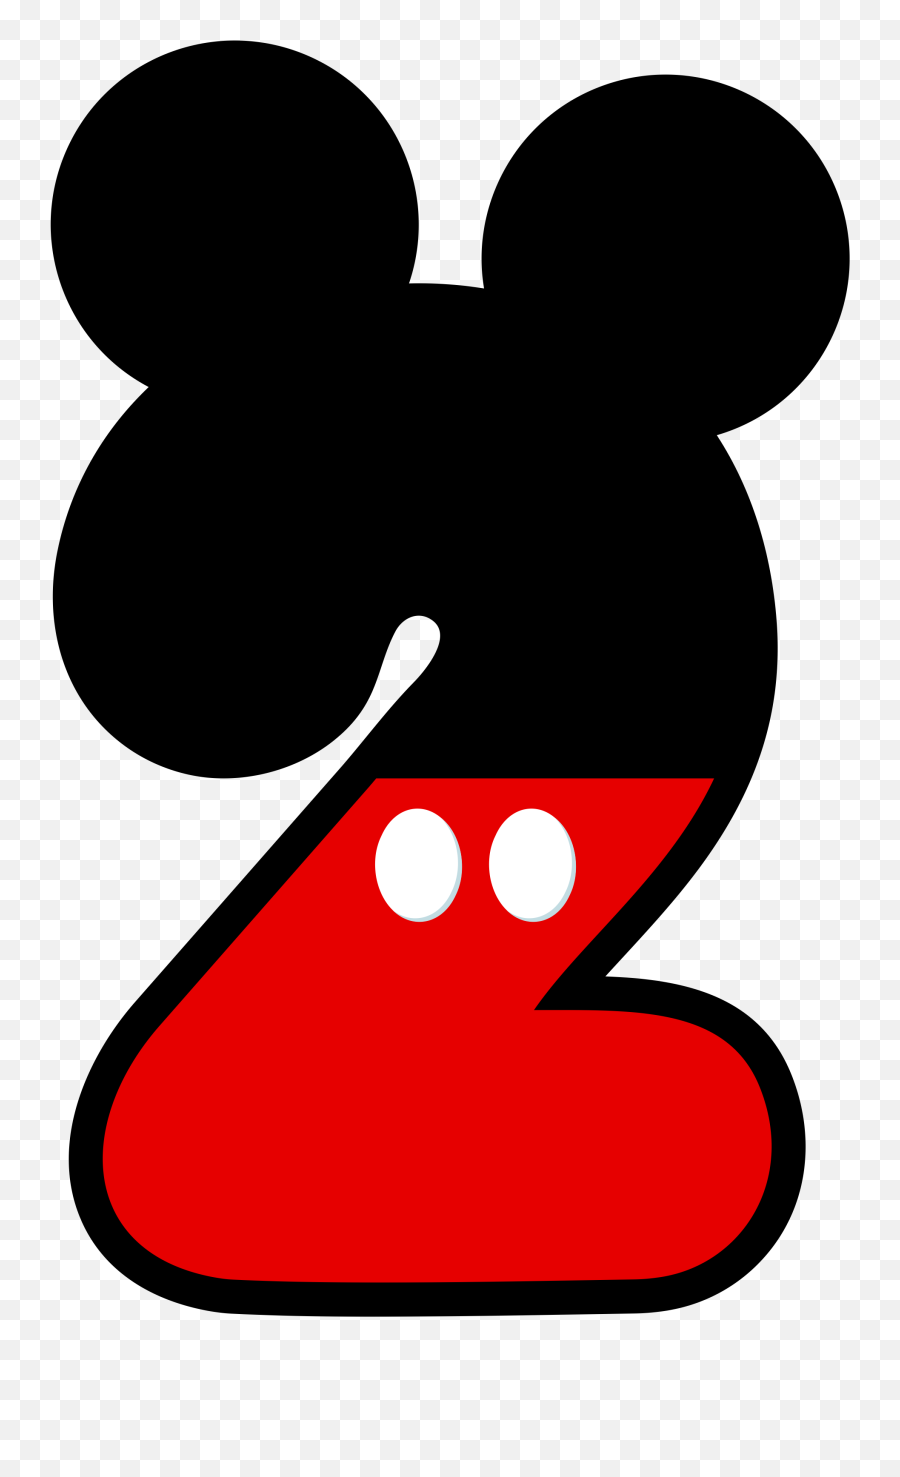 Mickey Mouse Money Clipart - Image 18 Mickey Mouse No 2 Emoji,Mickey Clipart